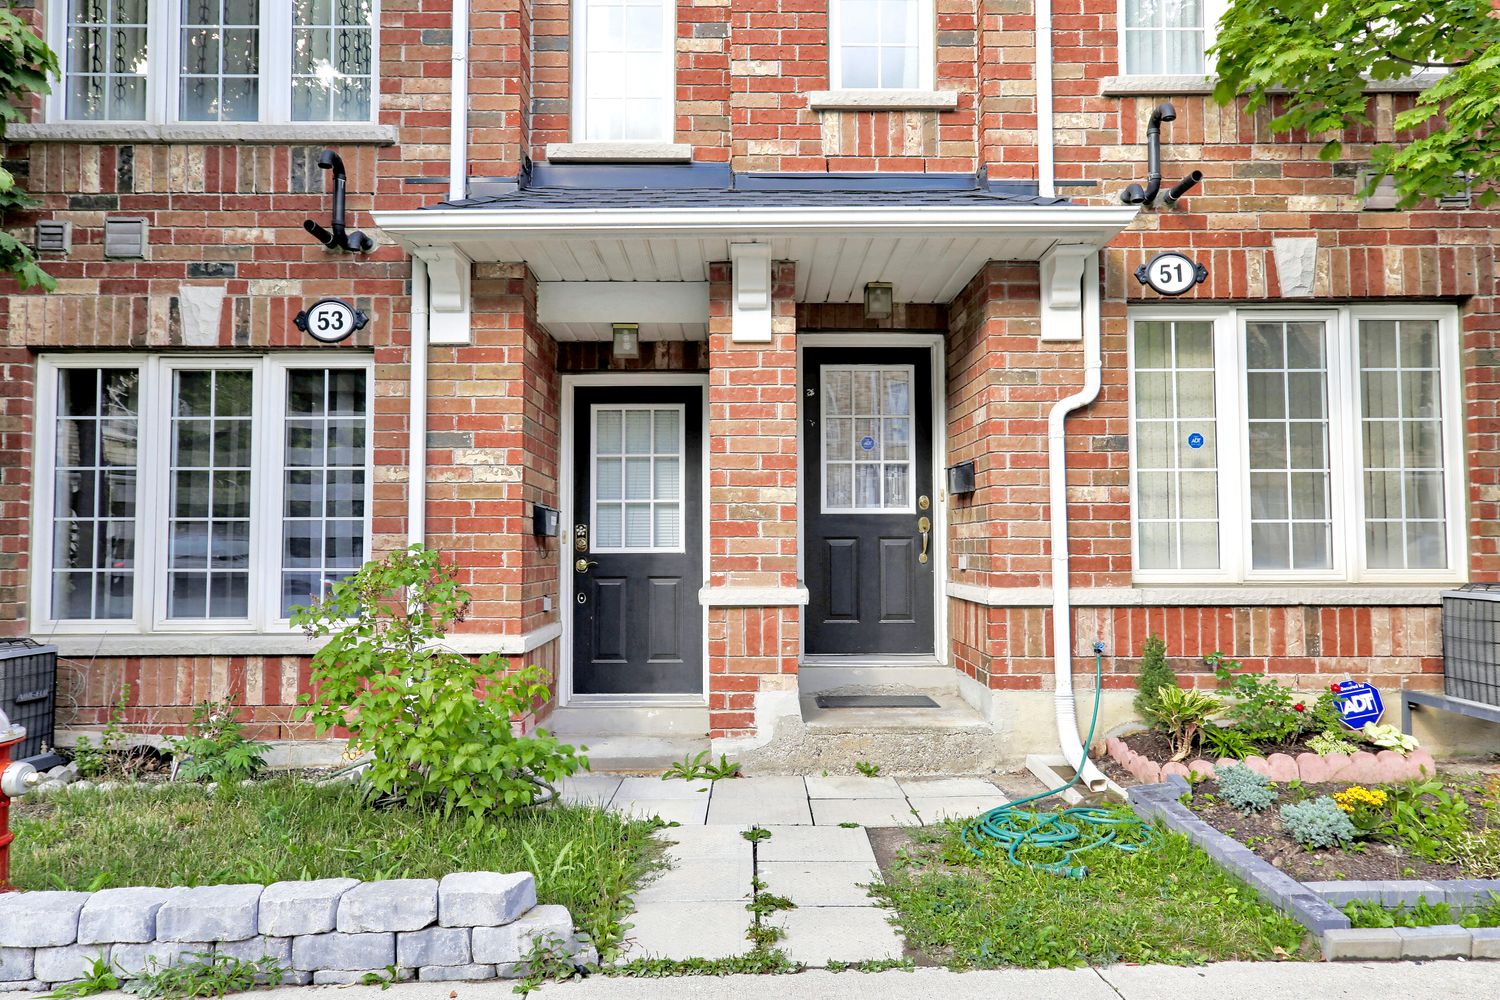 2-96 Birdstone Crescent. Townhomes of St. Clair I is located in  West End, Toronto - image #4 of 4